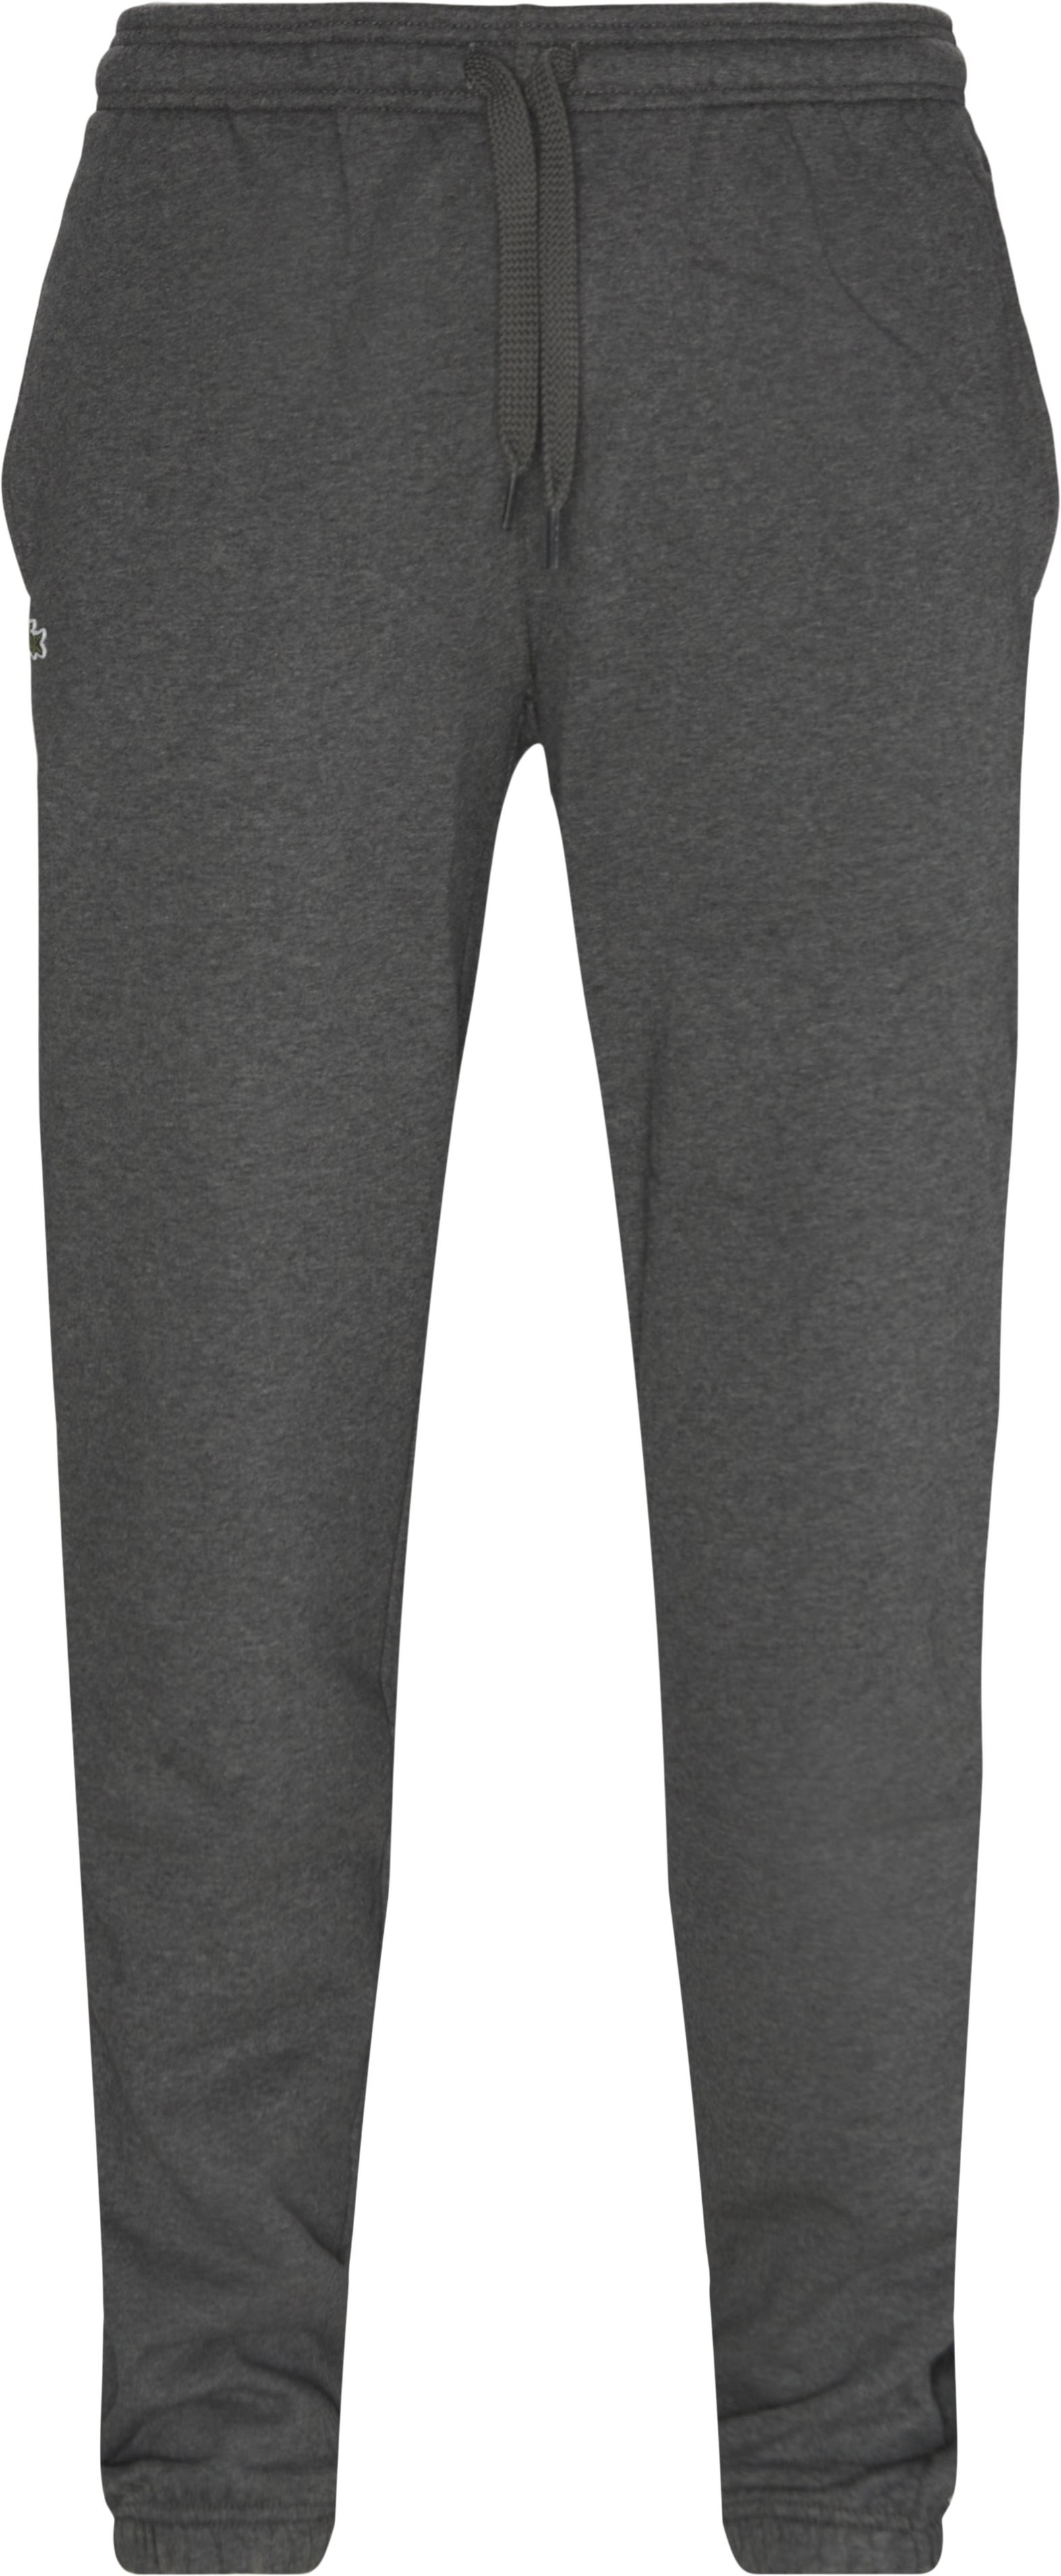 Lacoste Trousers XH7611 21 Grey